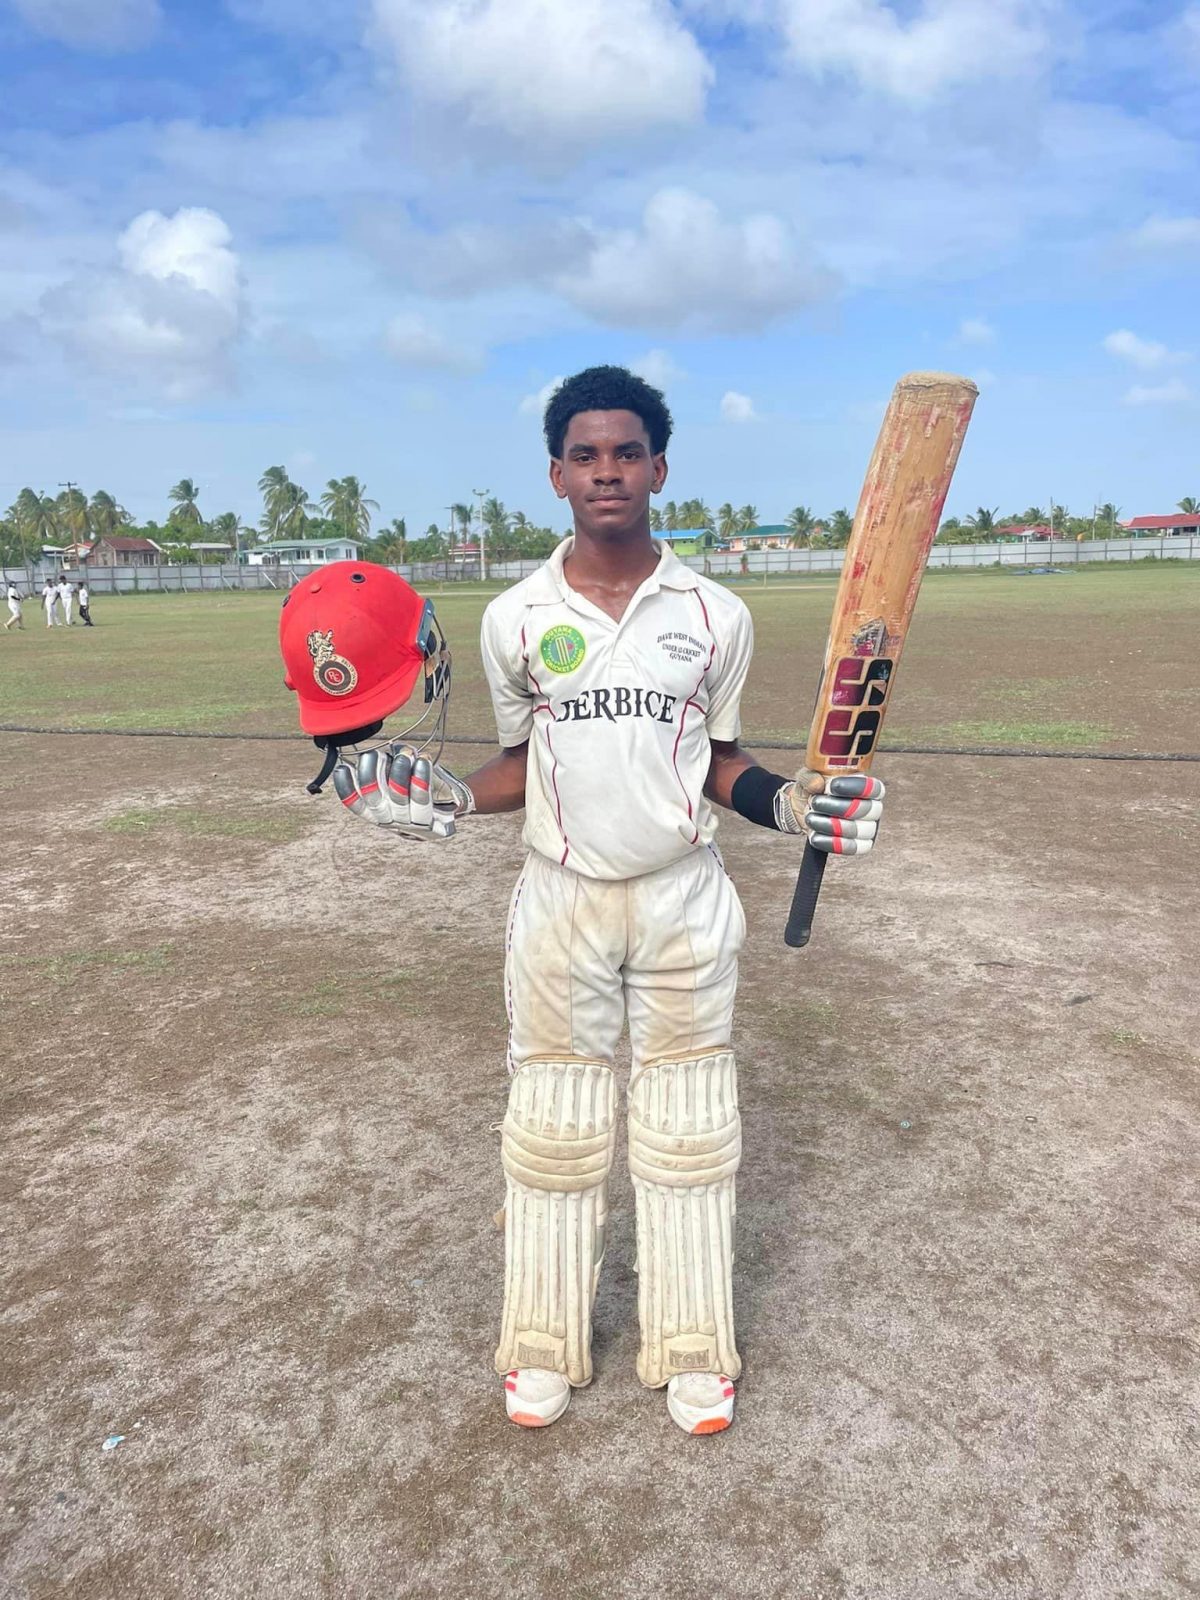 Adrian Hetmyer (photo compliments of Rose Hall Community Centre Cricket Club)